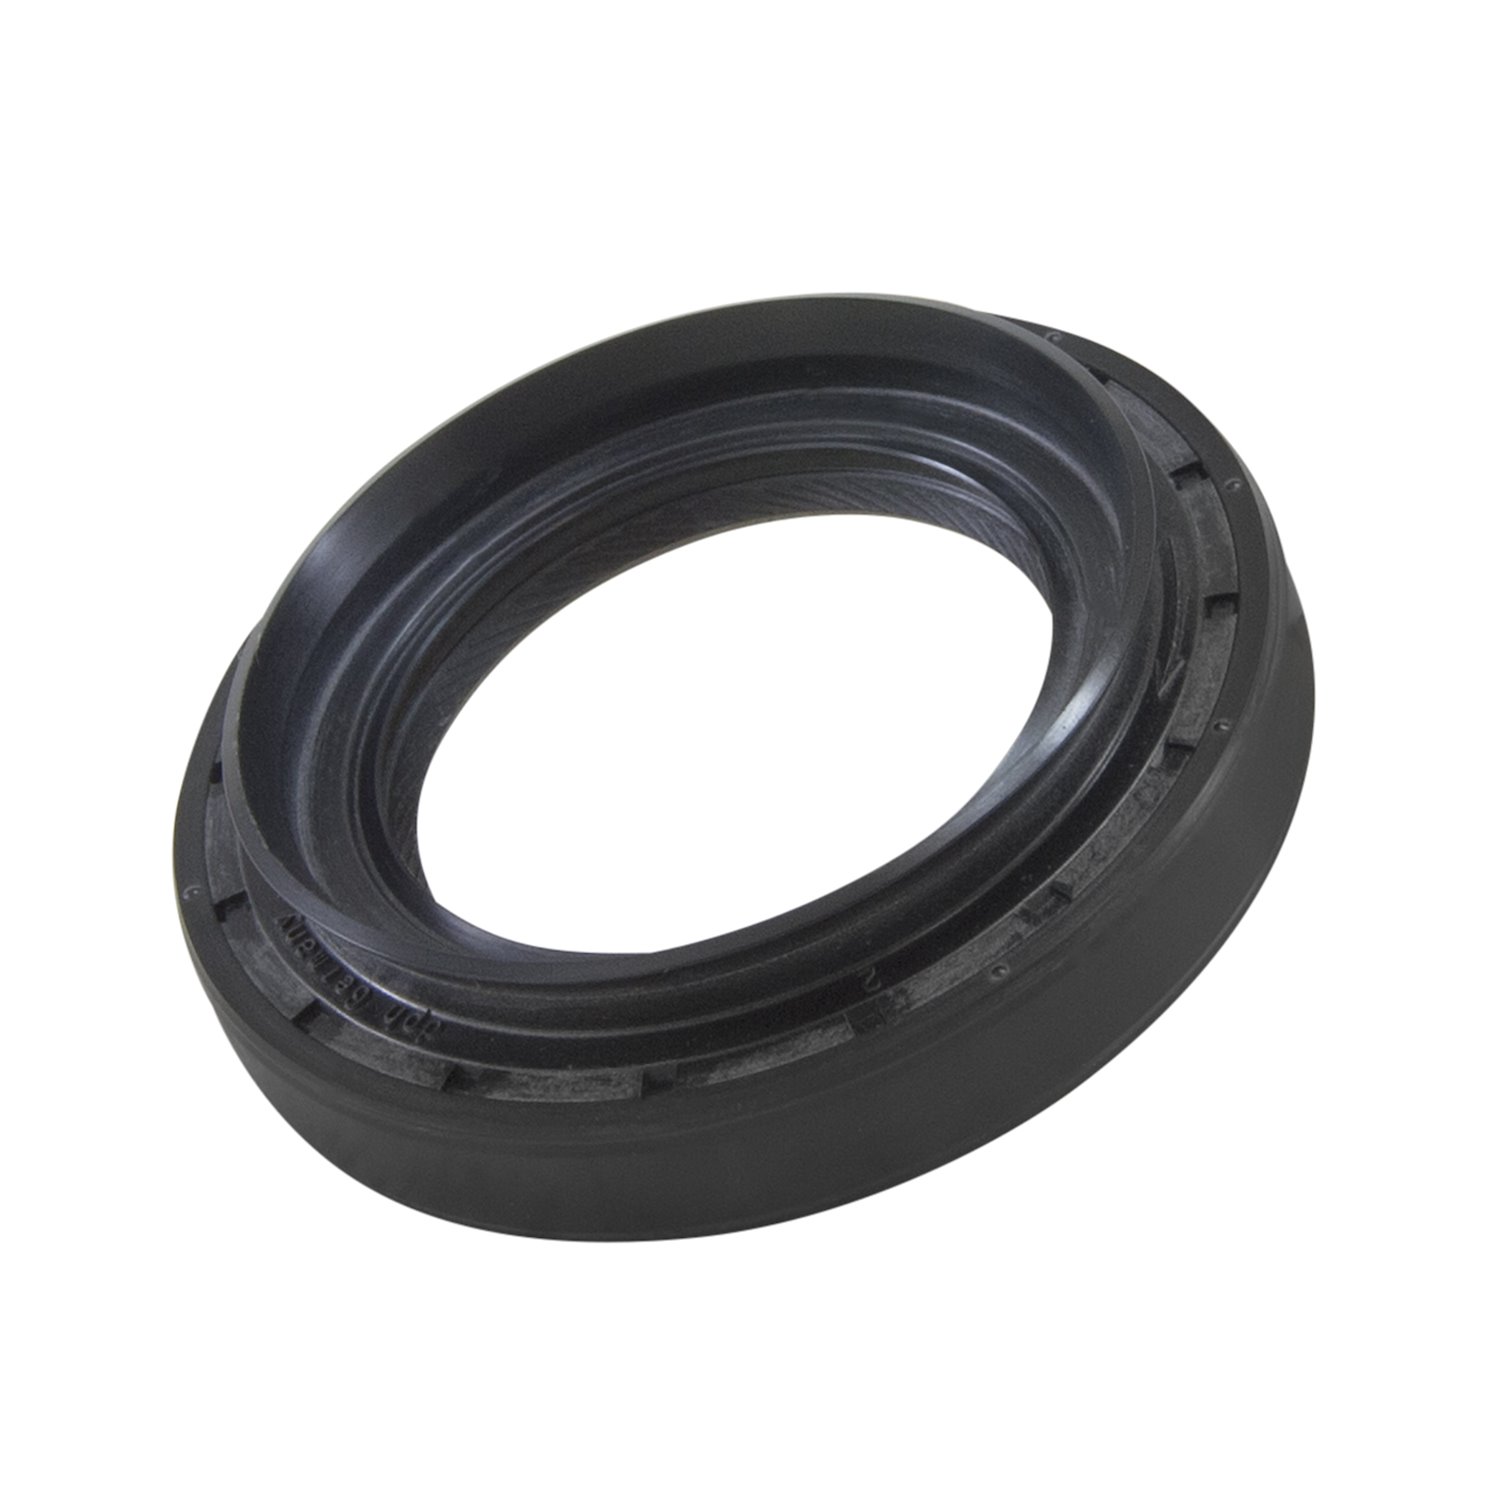 07 And Up Tundra 9.5 in. Rear Pinion Seal